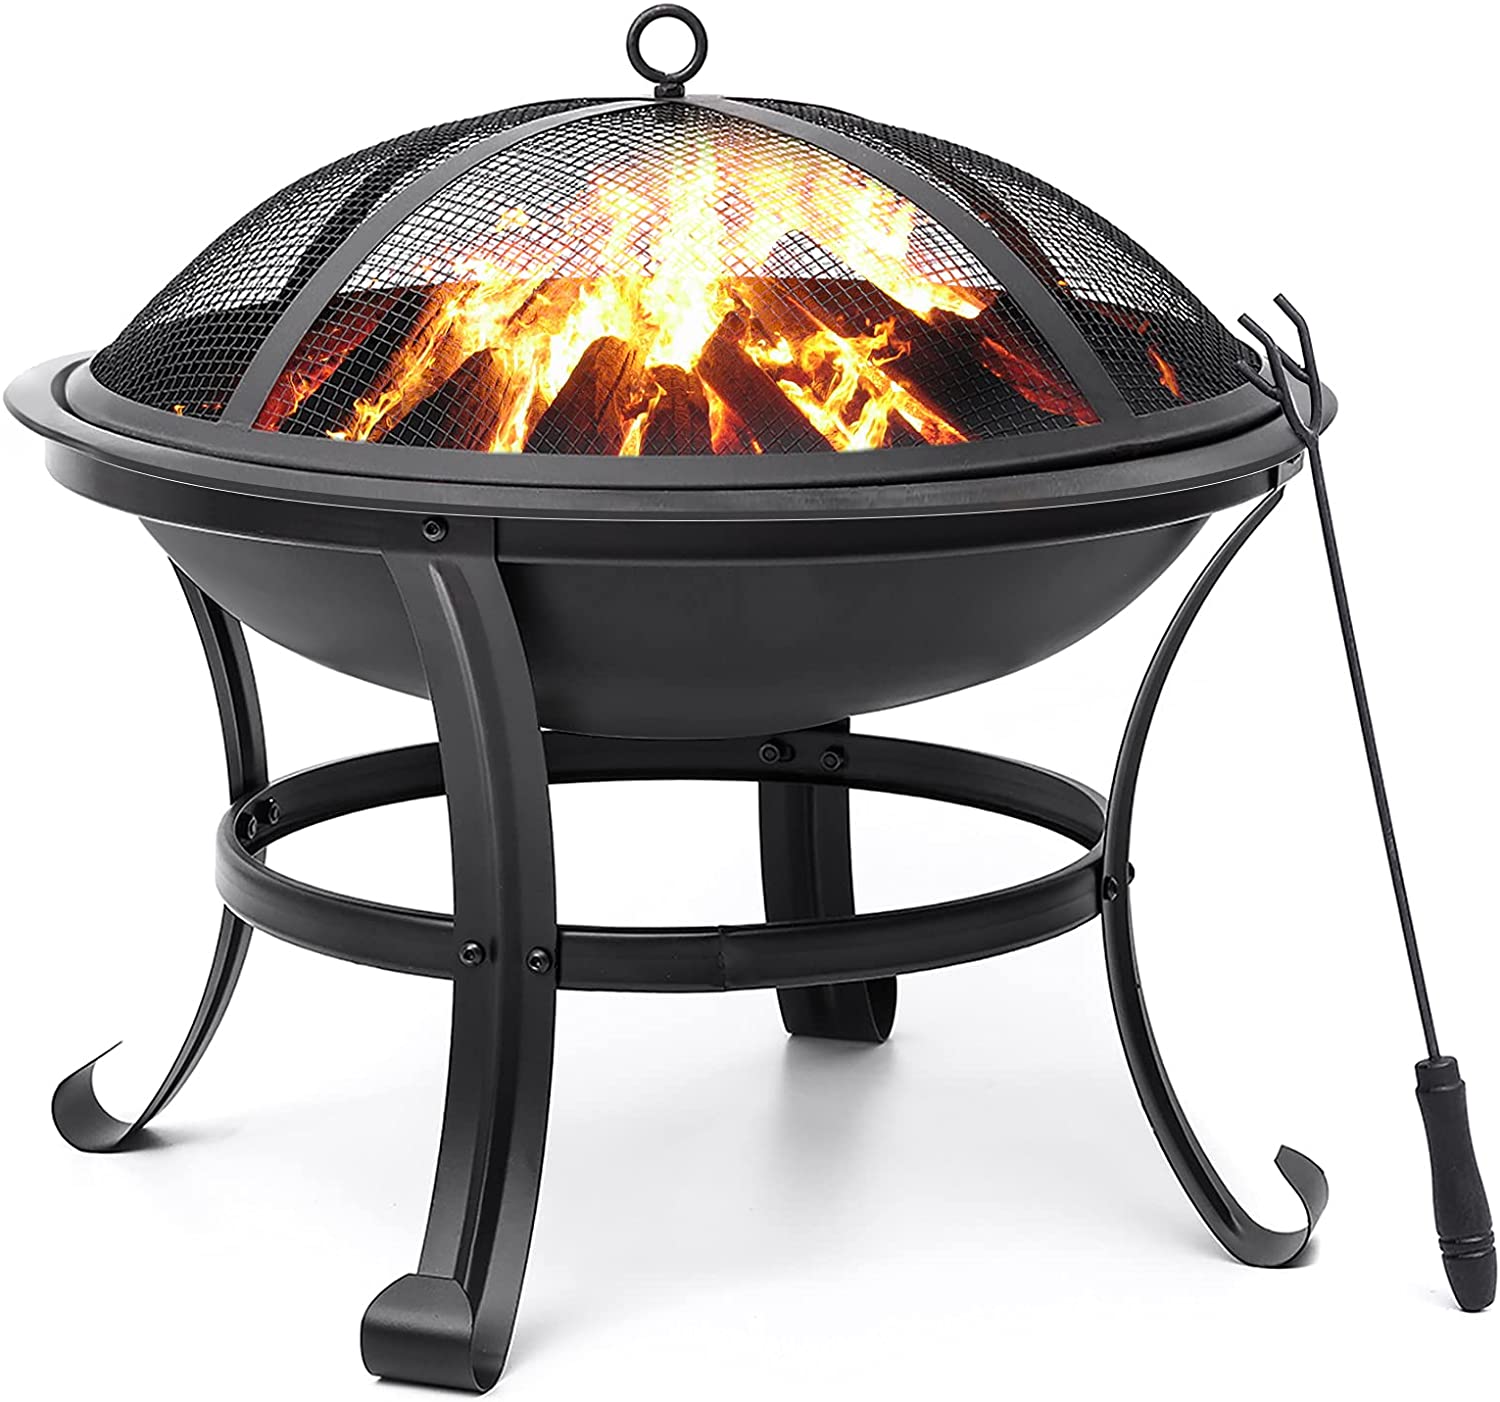 KingSo 22 inch Wood Burning Fire Pit for Camping Picnic Bonfire Patio Outside Backyard Garden Small Bonfire Pit Steel Firepit Bowl with Spark Screen, Log Grate, Poker - image 1 of 9